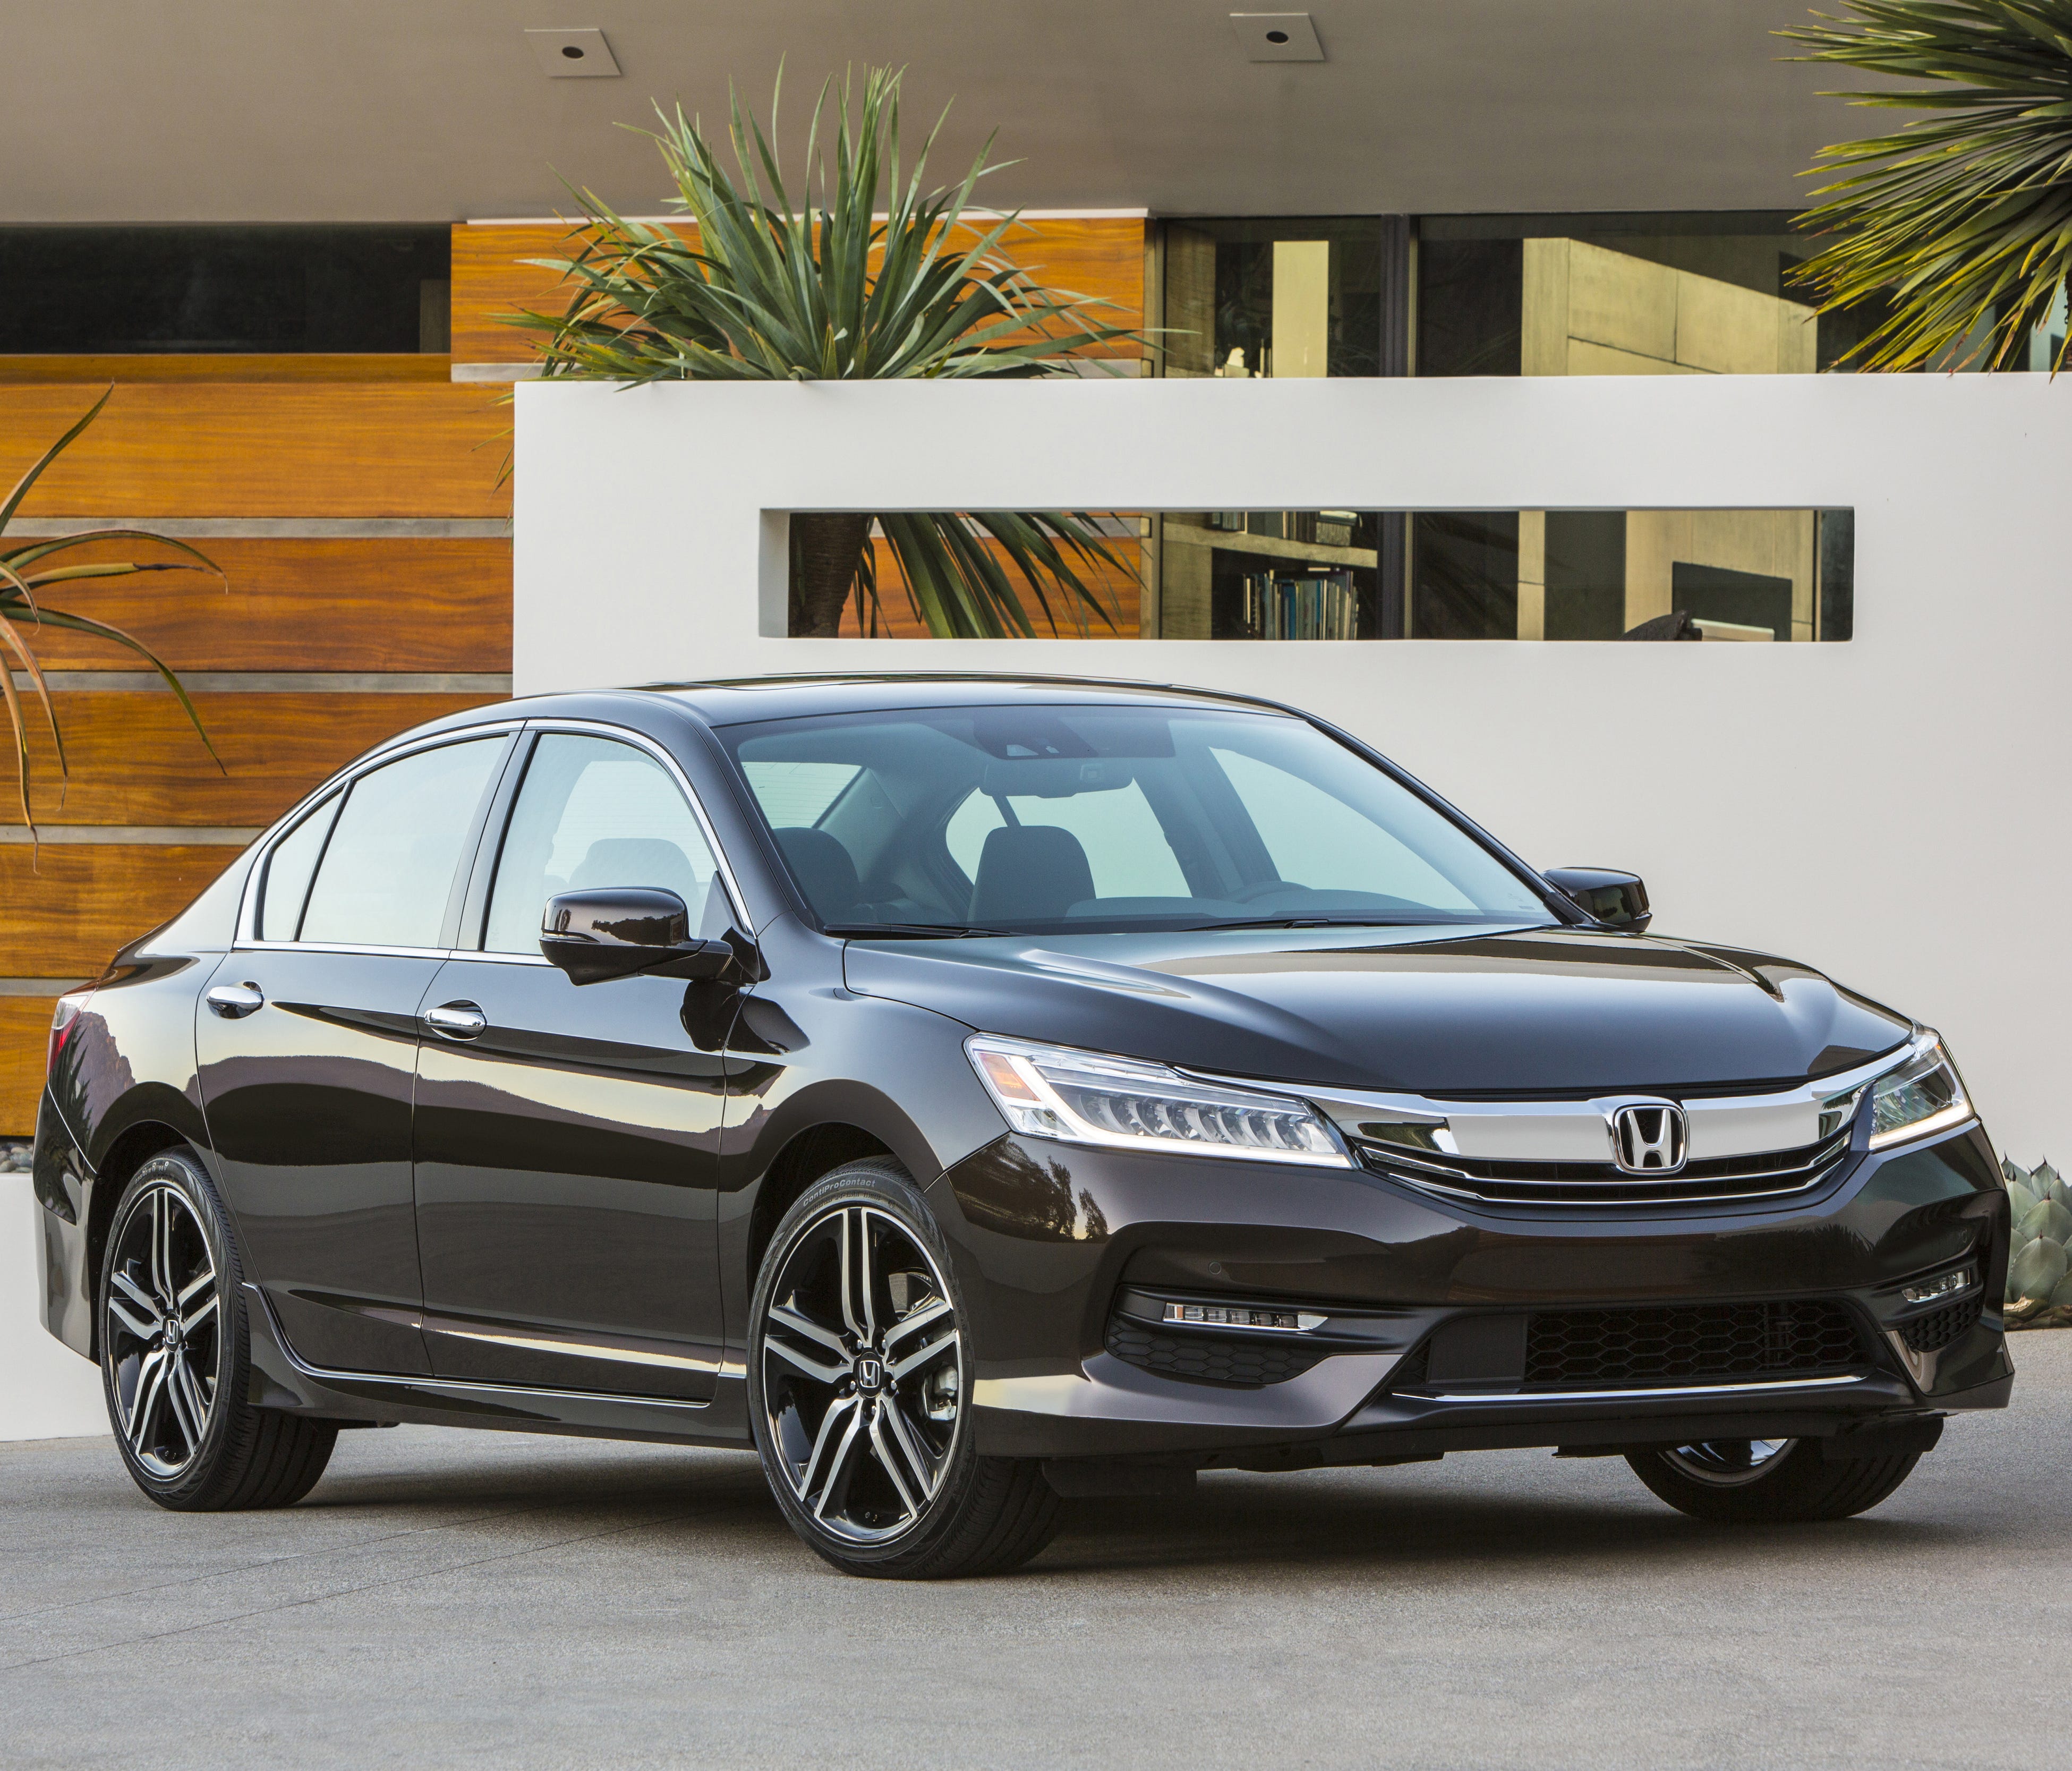 2016 Honda Accord is one of the country's most popular sedans